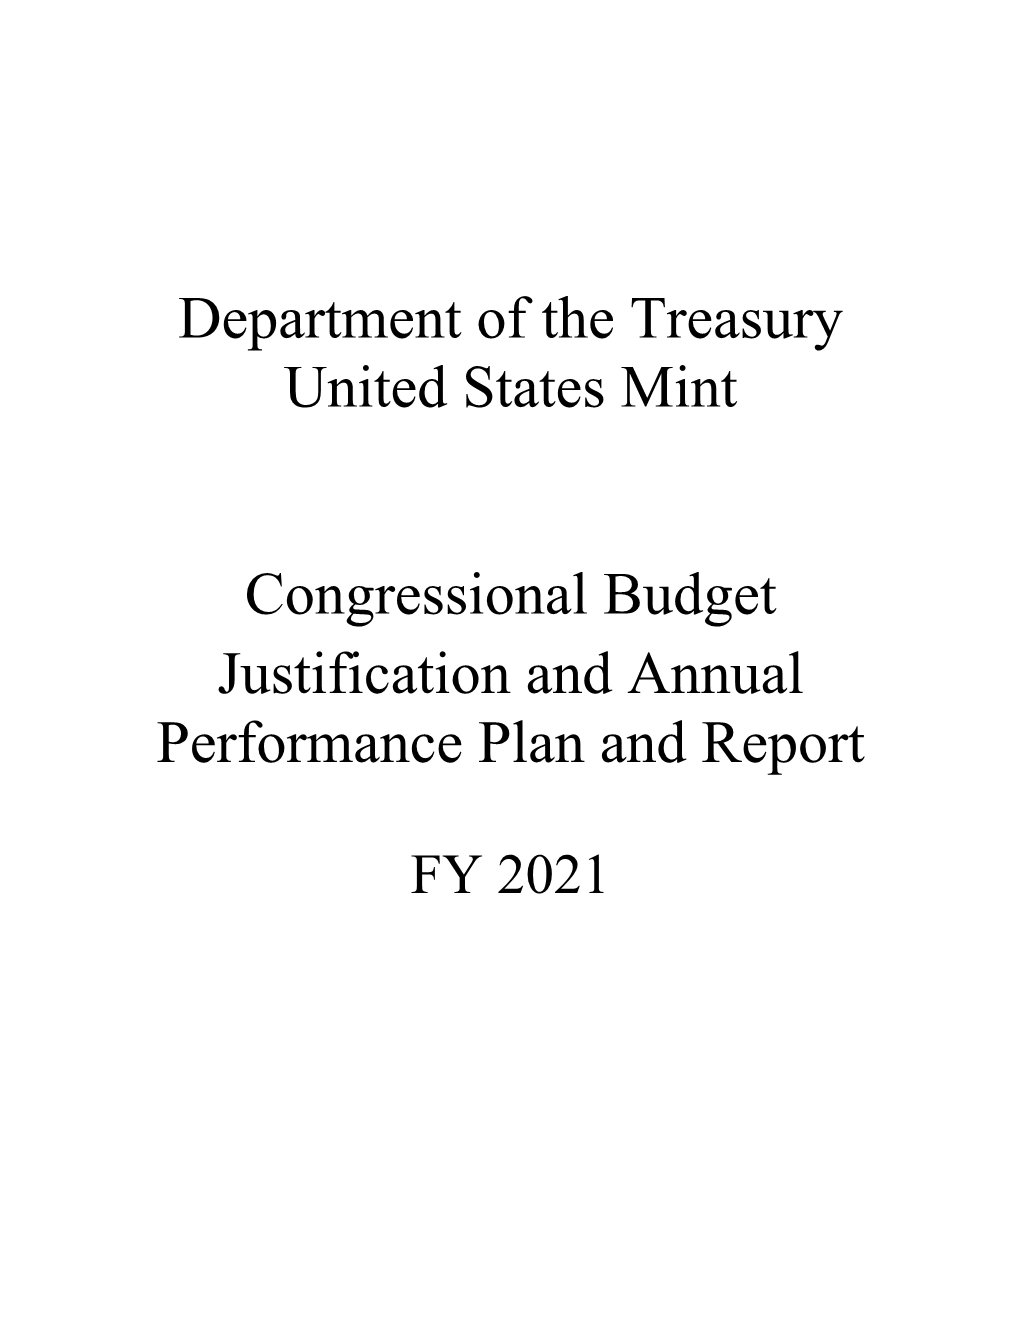 Department of the Treasury United States Mint Congressional Budget